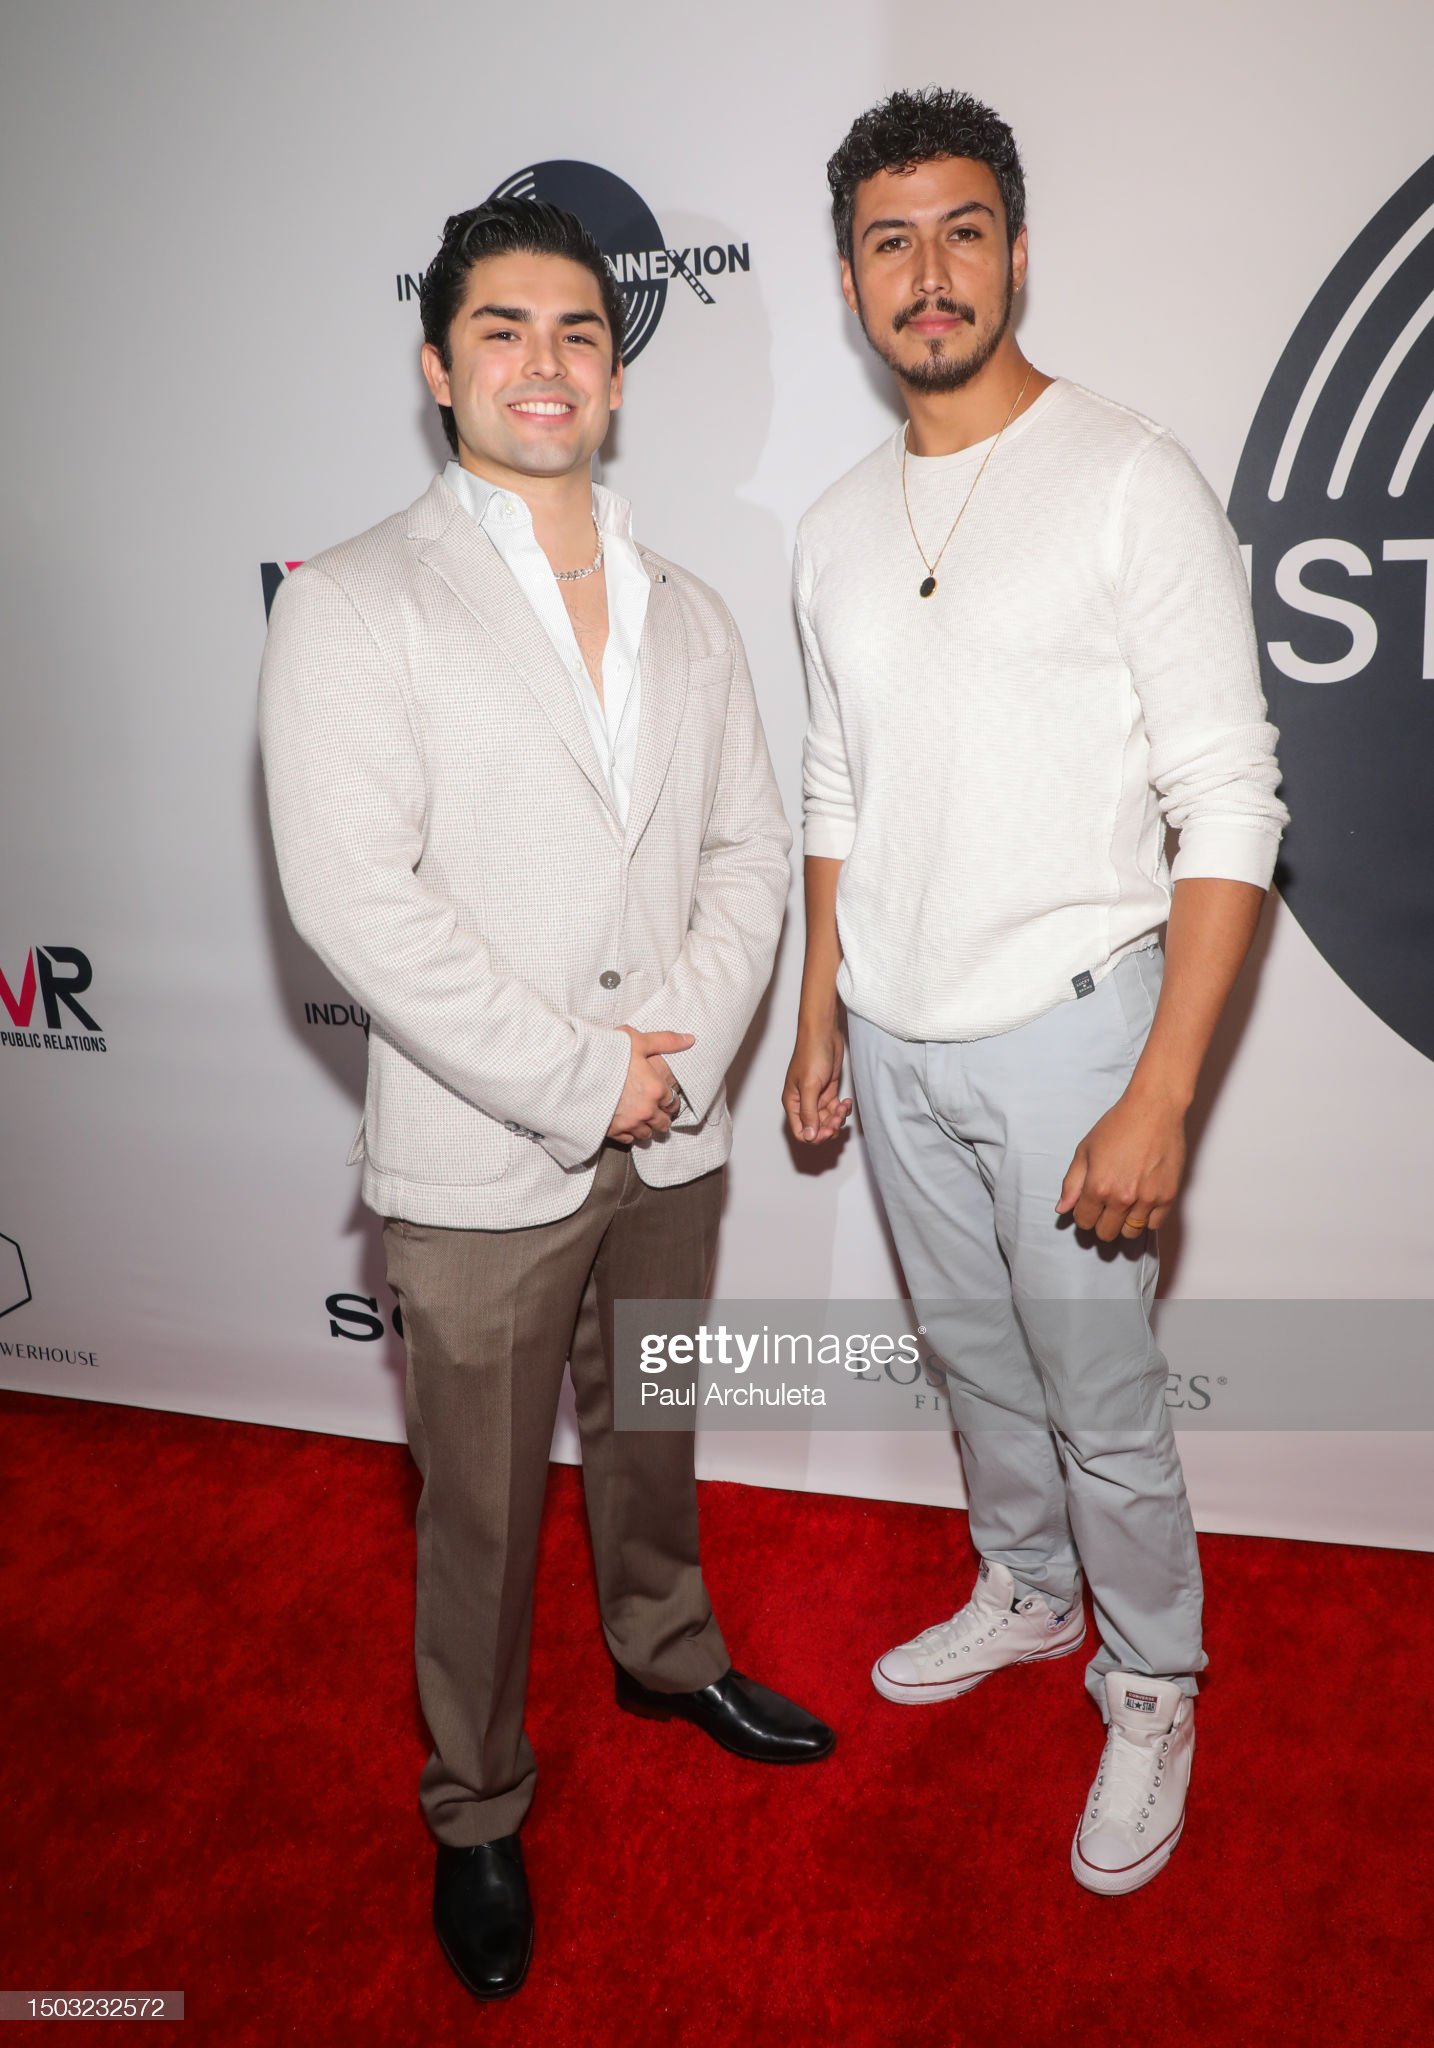 LOS ANGELES, CALIFORNIA - JUNE 27: Diego Tinoco (L) and Julio Macias (R) attend the Industry Connexion & The Los Angeles Film School presents: Industry Connext 102 at Los Angeles Film School on June 27, 2023 in Los Angeles, California. (Photo by Paul Archuleta/Getty Images)